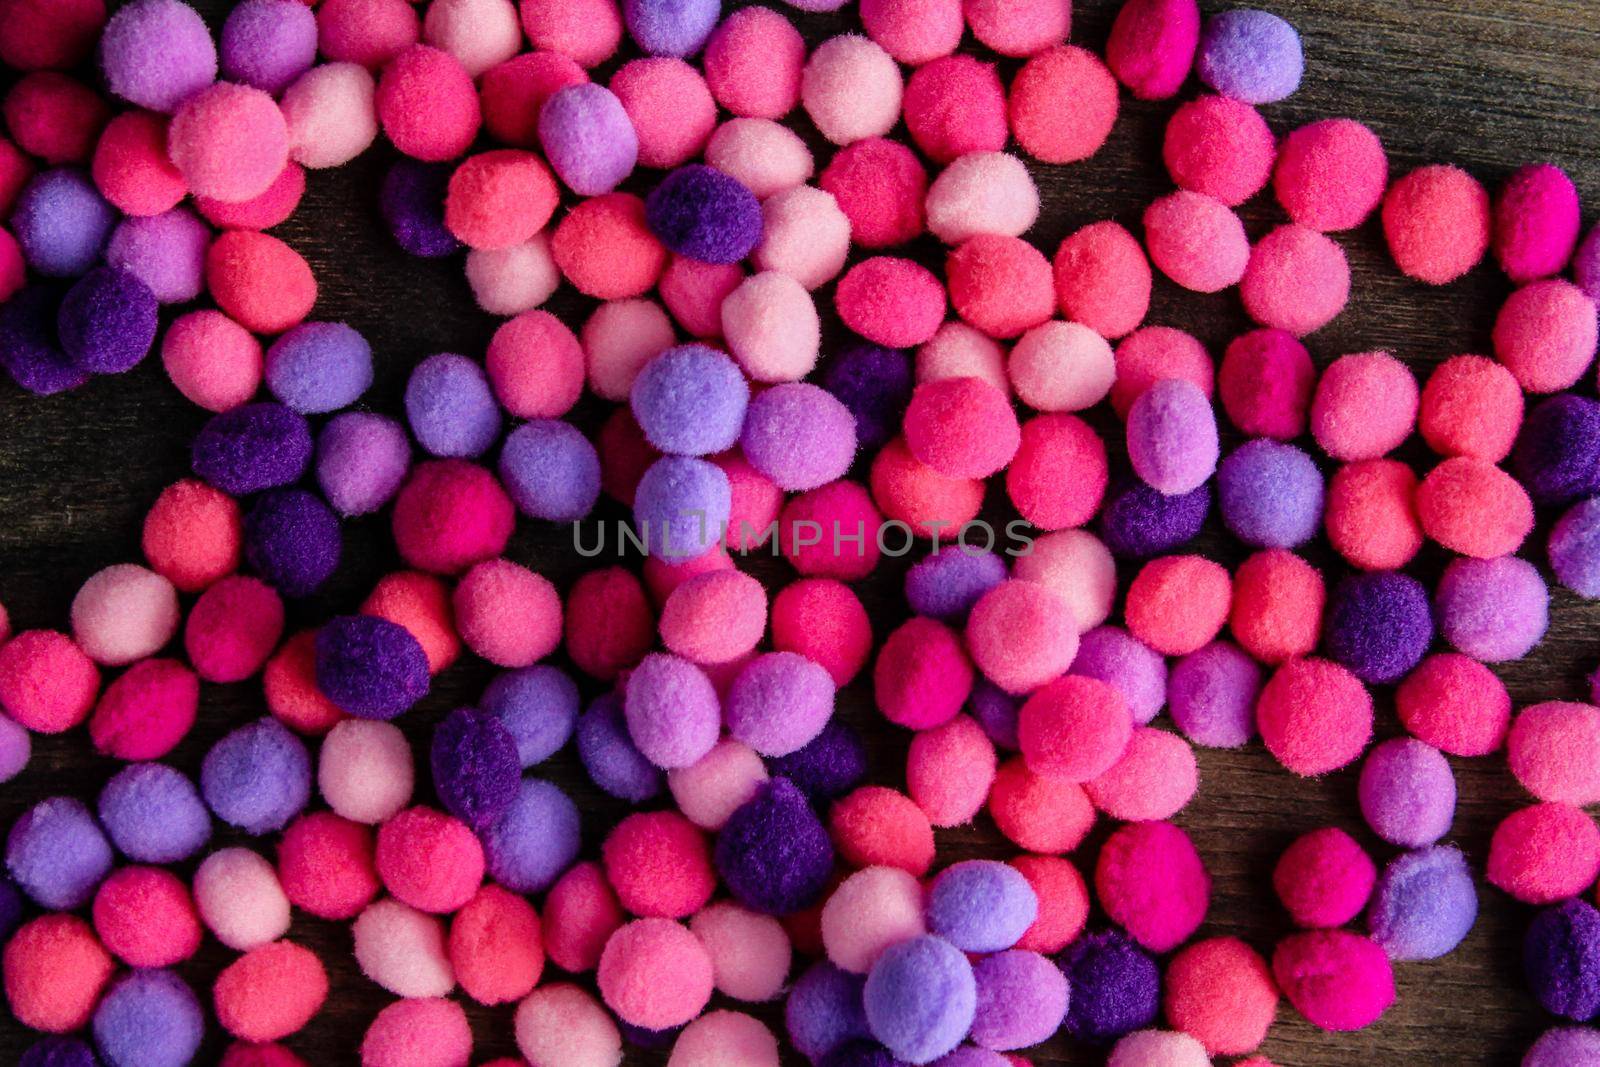 Round pink and purple fluffy balls pompoms on wooden background by JuliaDorian